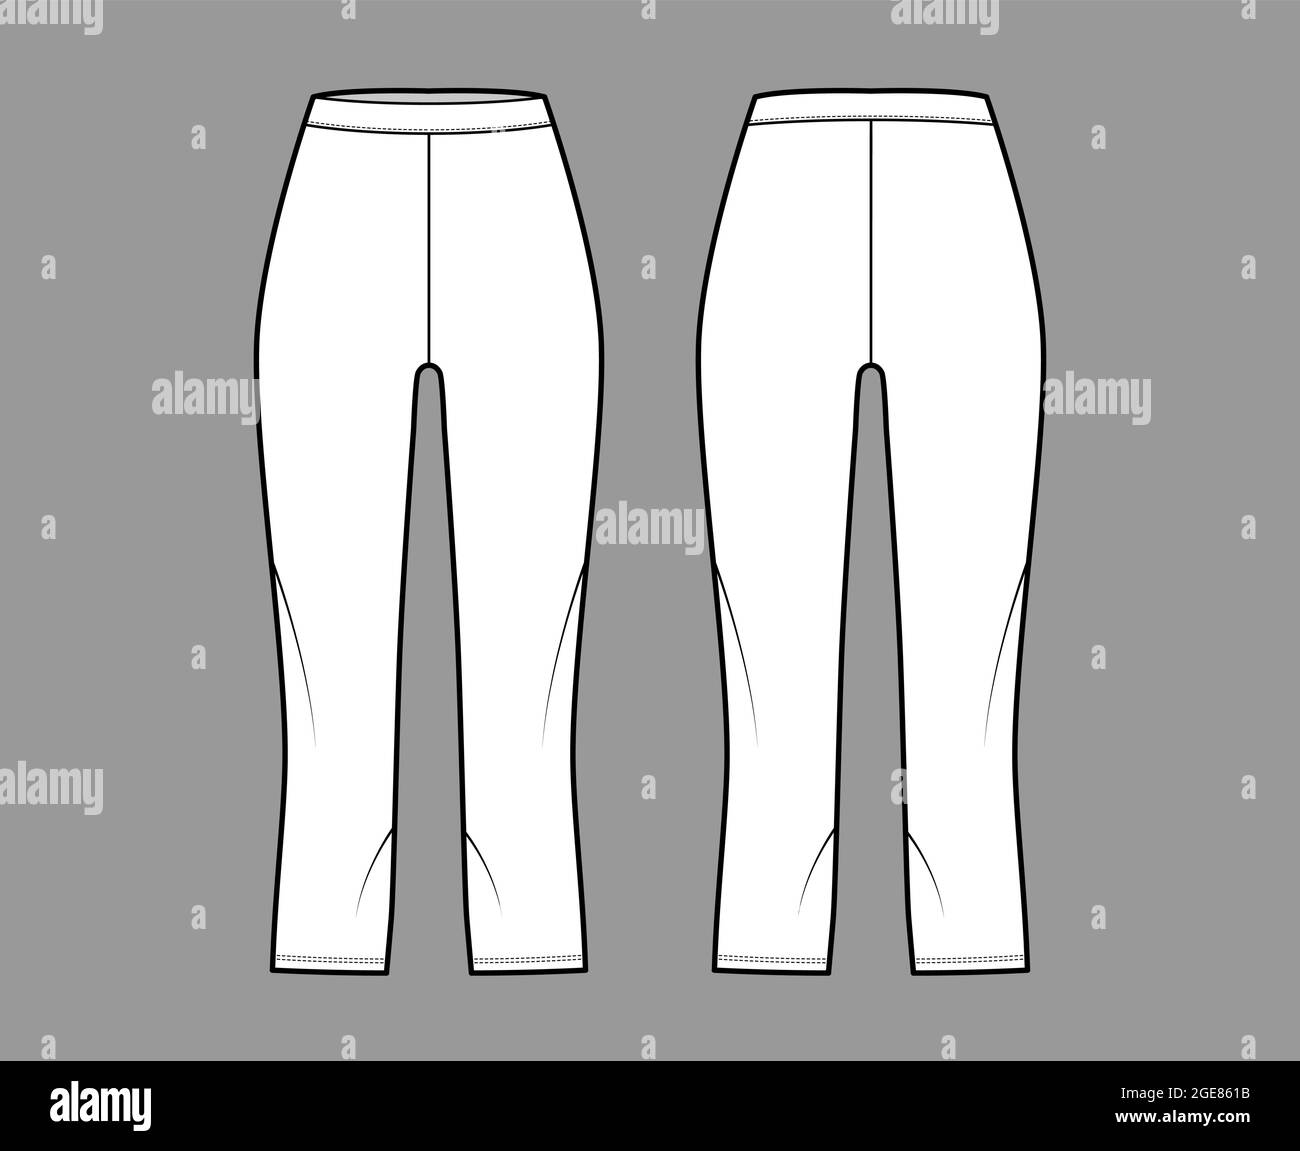 Bike shorts Leggings technical fashion illustration with natural waist, high rise, calf length. Flat sport training pants, trousers apparel template front, back, white color. Women, unisex CAD mockup Stock Vector